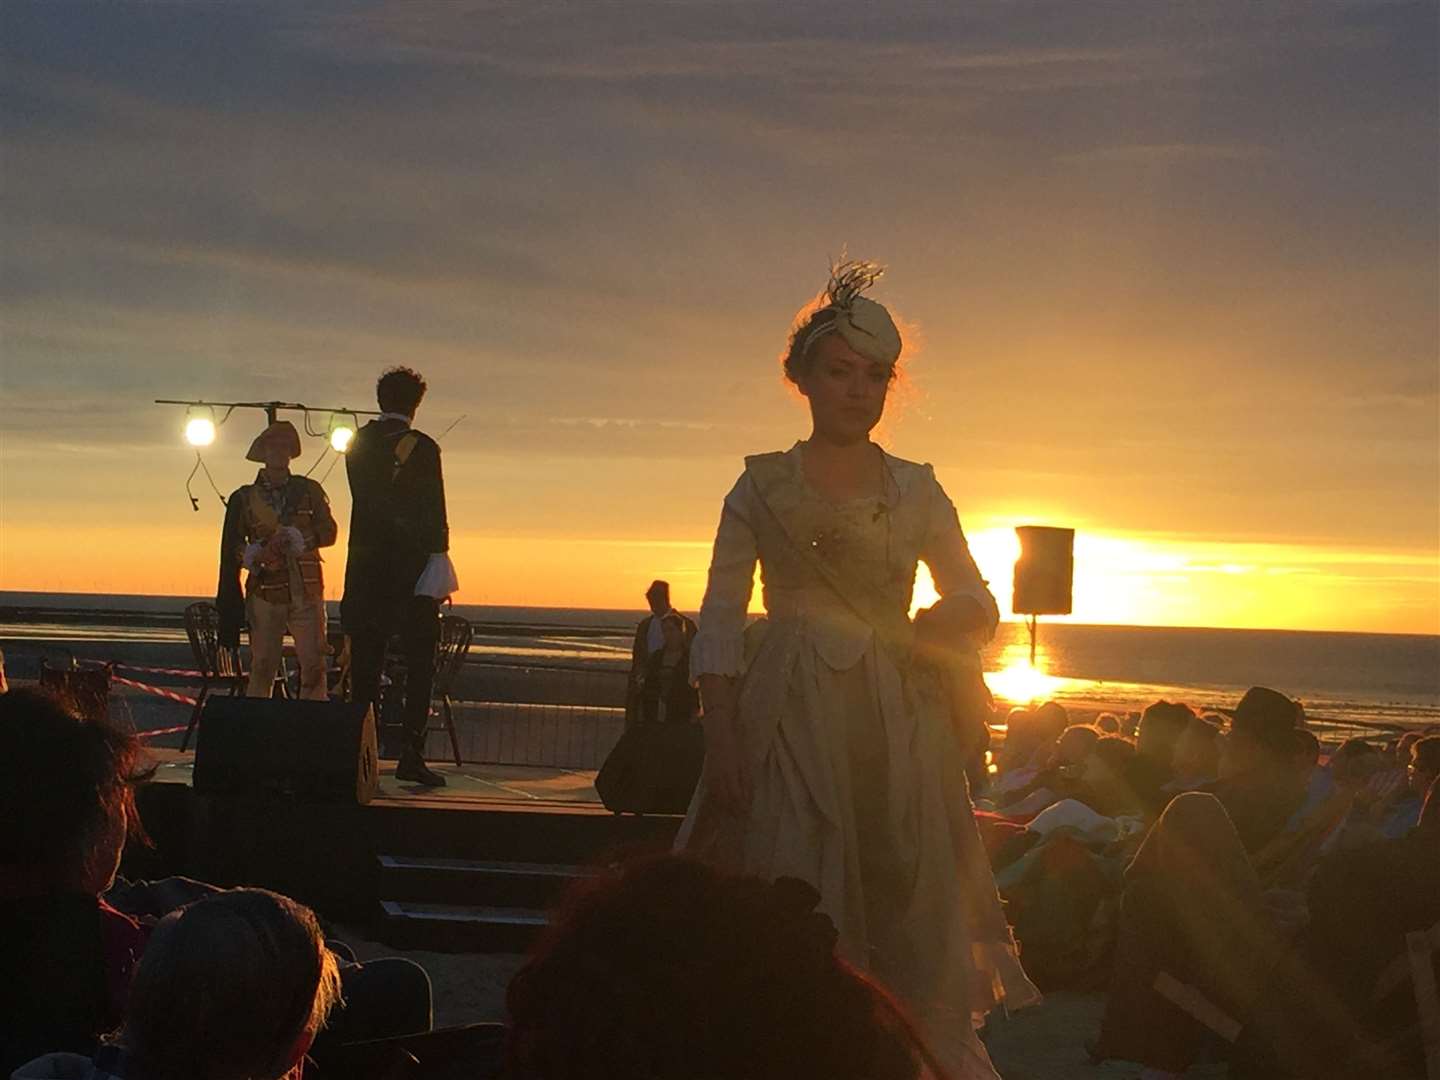 Changeling Theatre will perform at Kent venues once again this summer - including a return to Margate beach. Picture: Flic Roberts